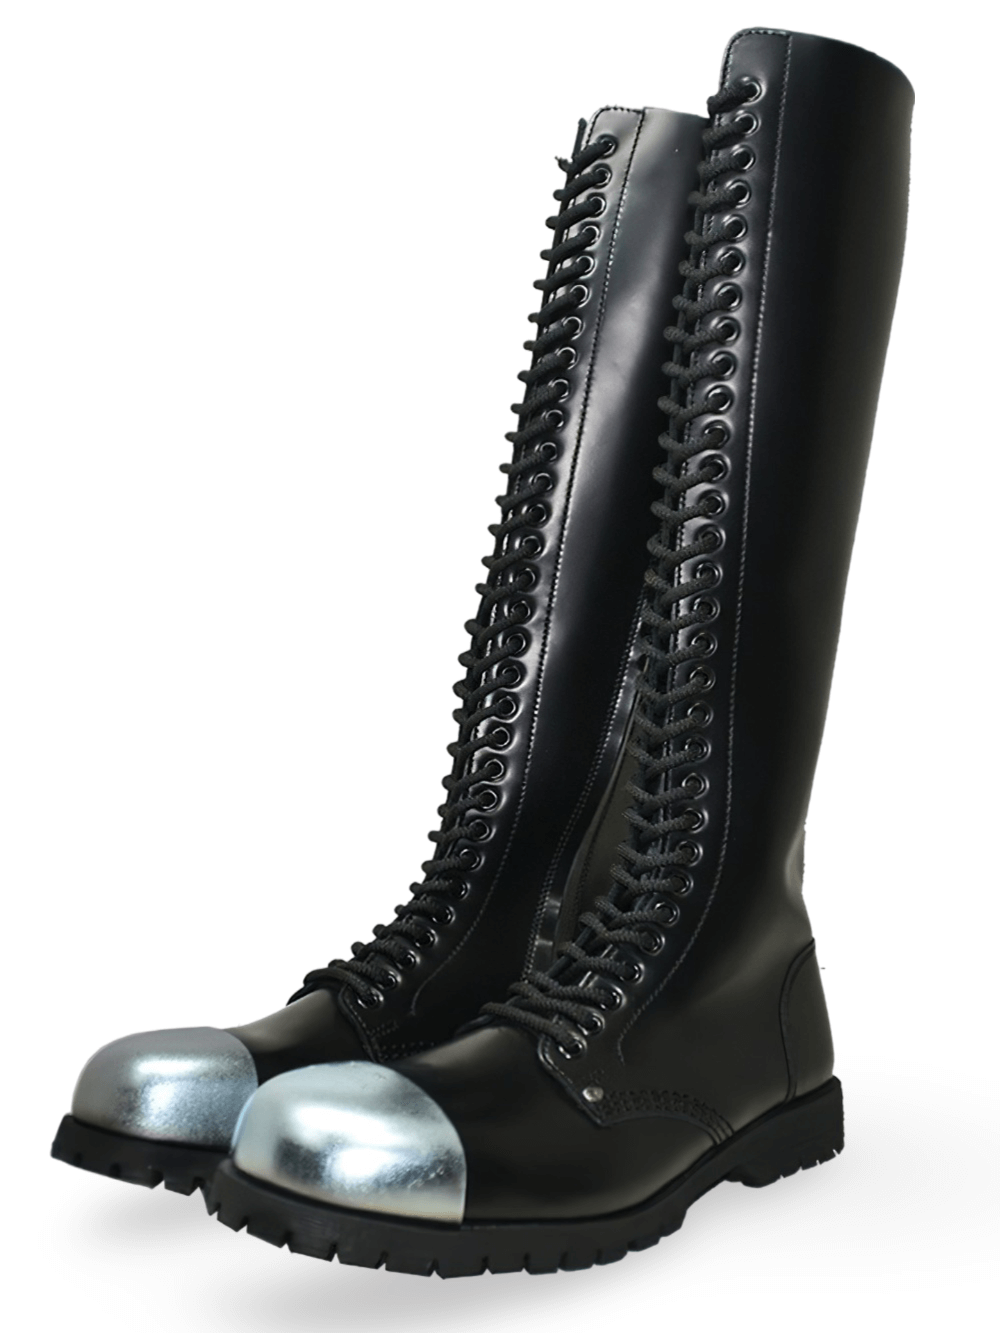 Edgy Lace-Up Knee High Boots with External Steel Toe